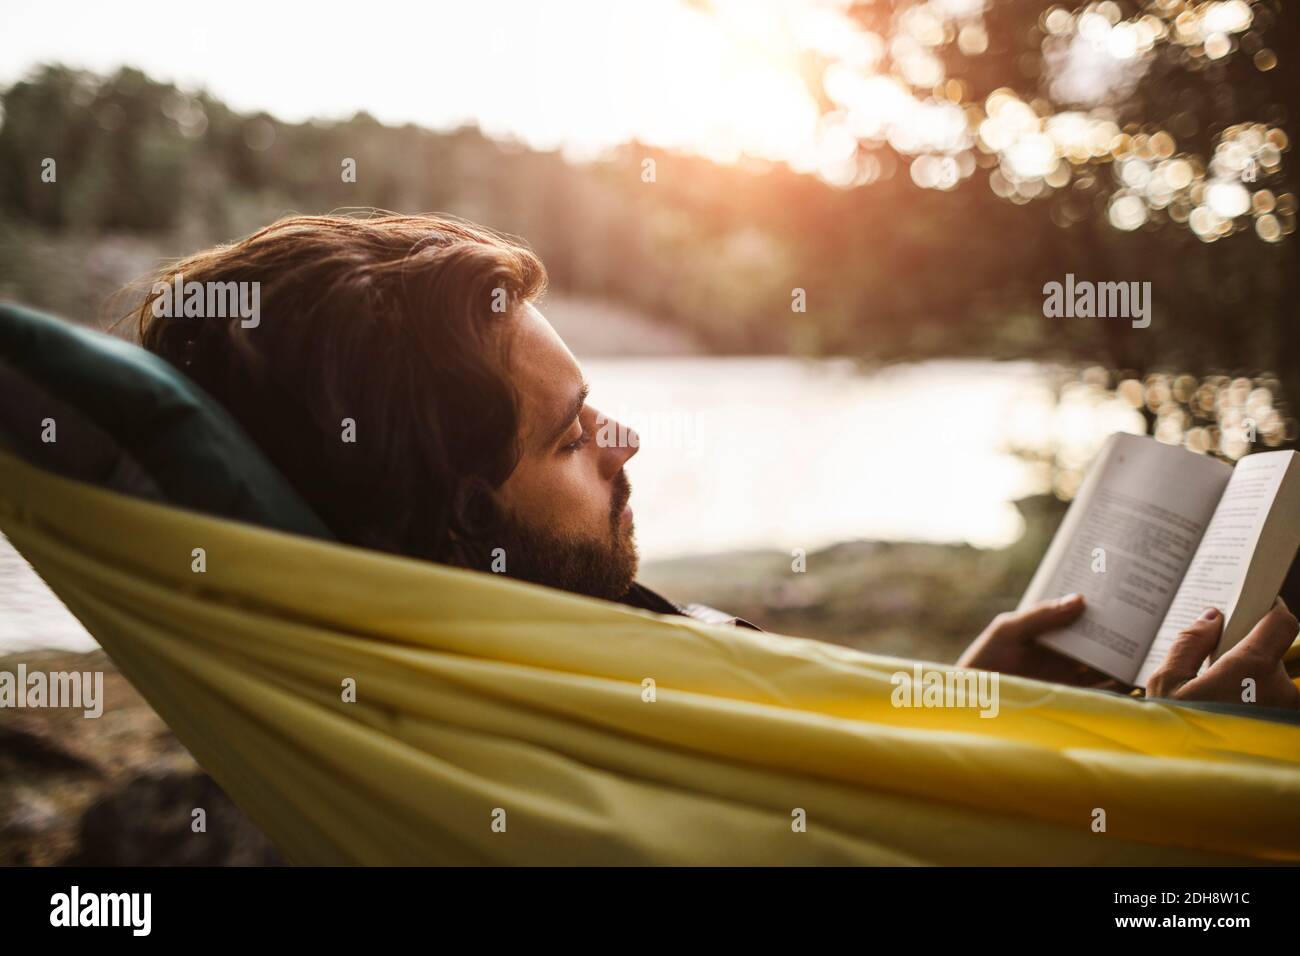 Contemplating man reading book while lying over hammock in forest Stock Photo